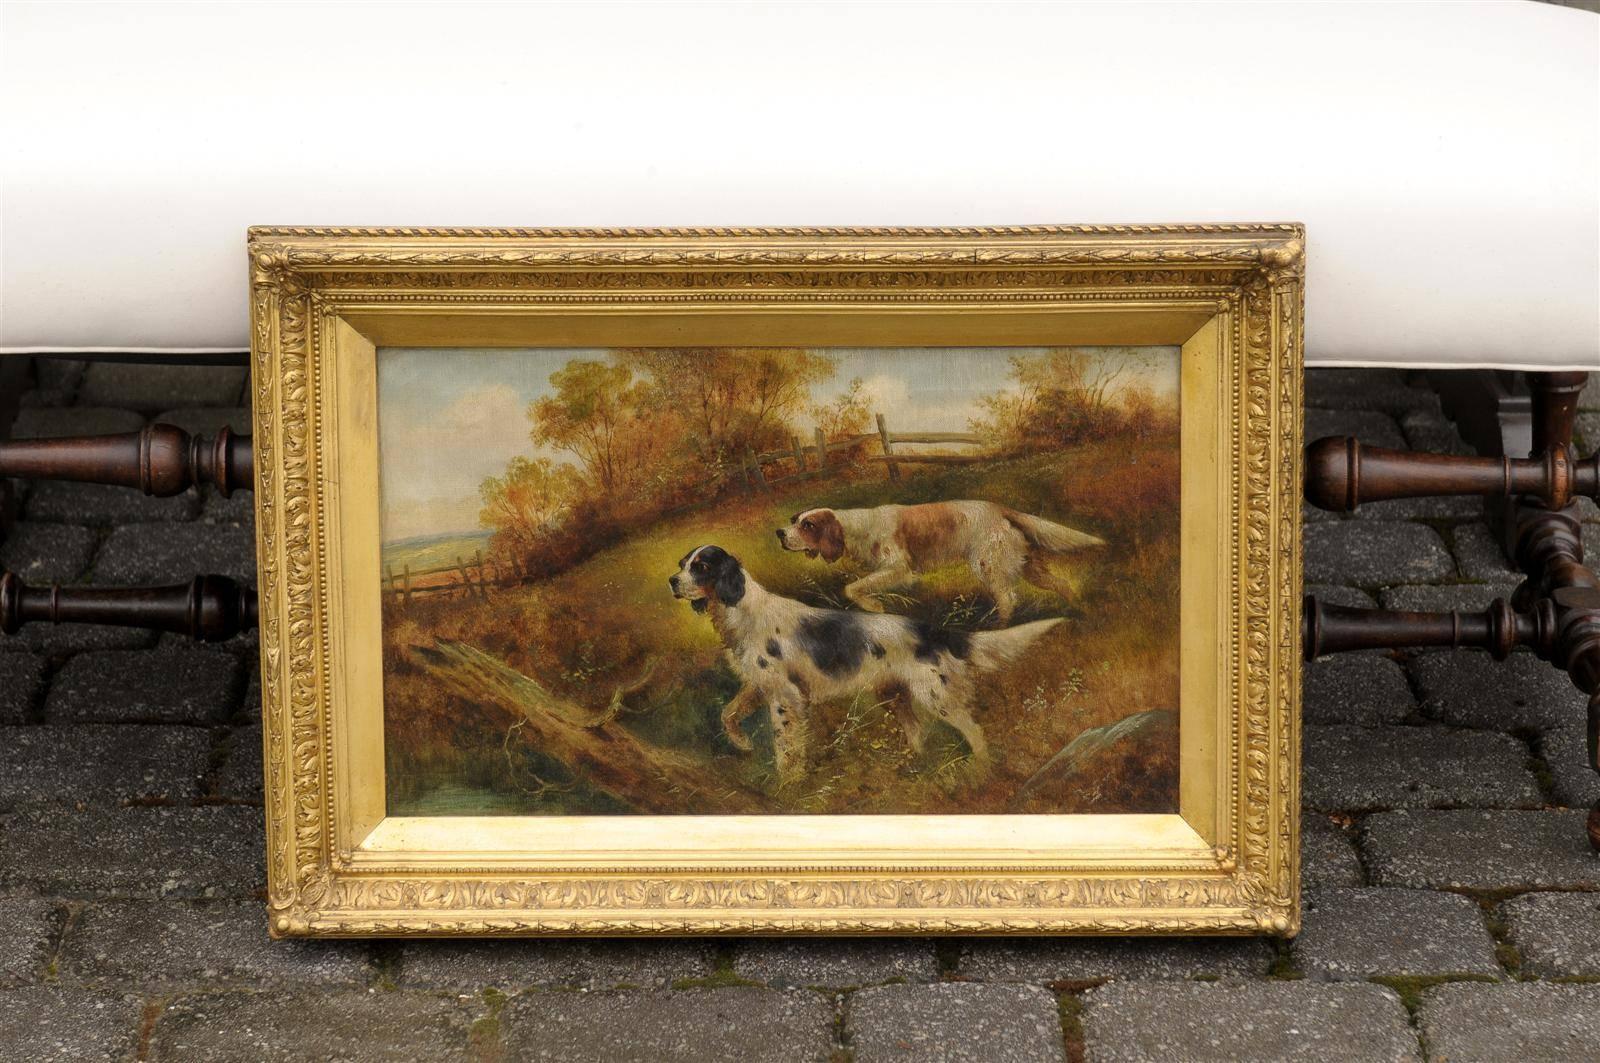 A Victorian era English oil painting featuring sporting dogs by painter Charles Dudley.  This spectacular painting features what appear to be two English Springer Spaniels in mid hunt, one black and white and the other brown and white.  Both dogs